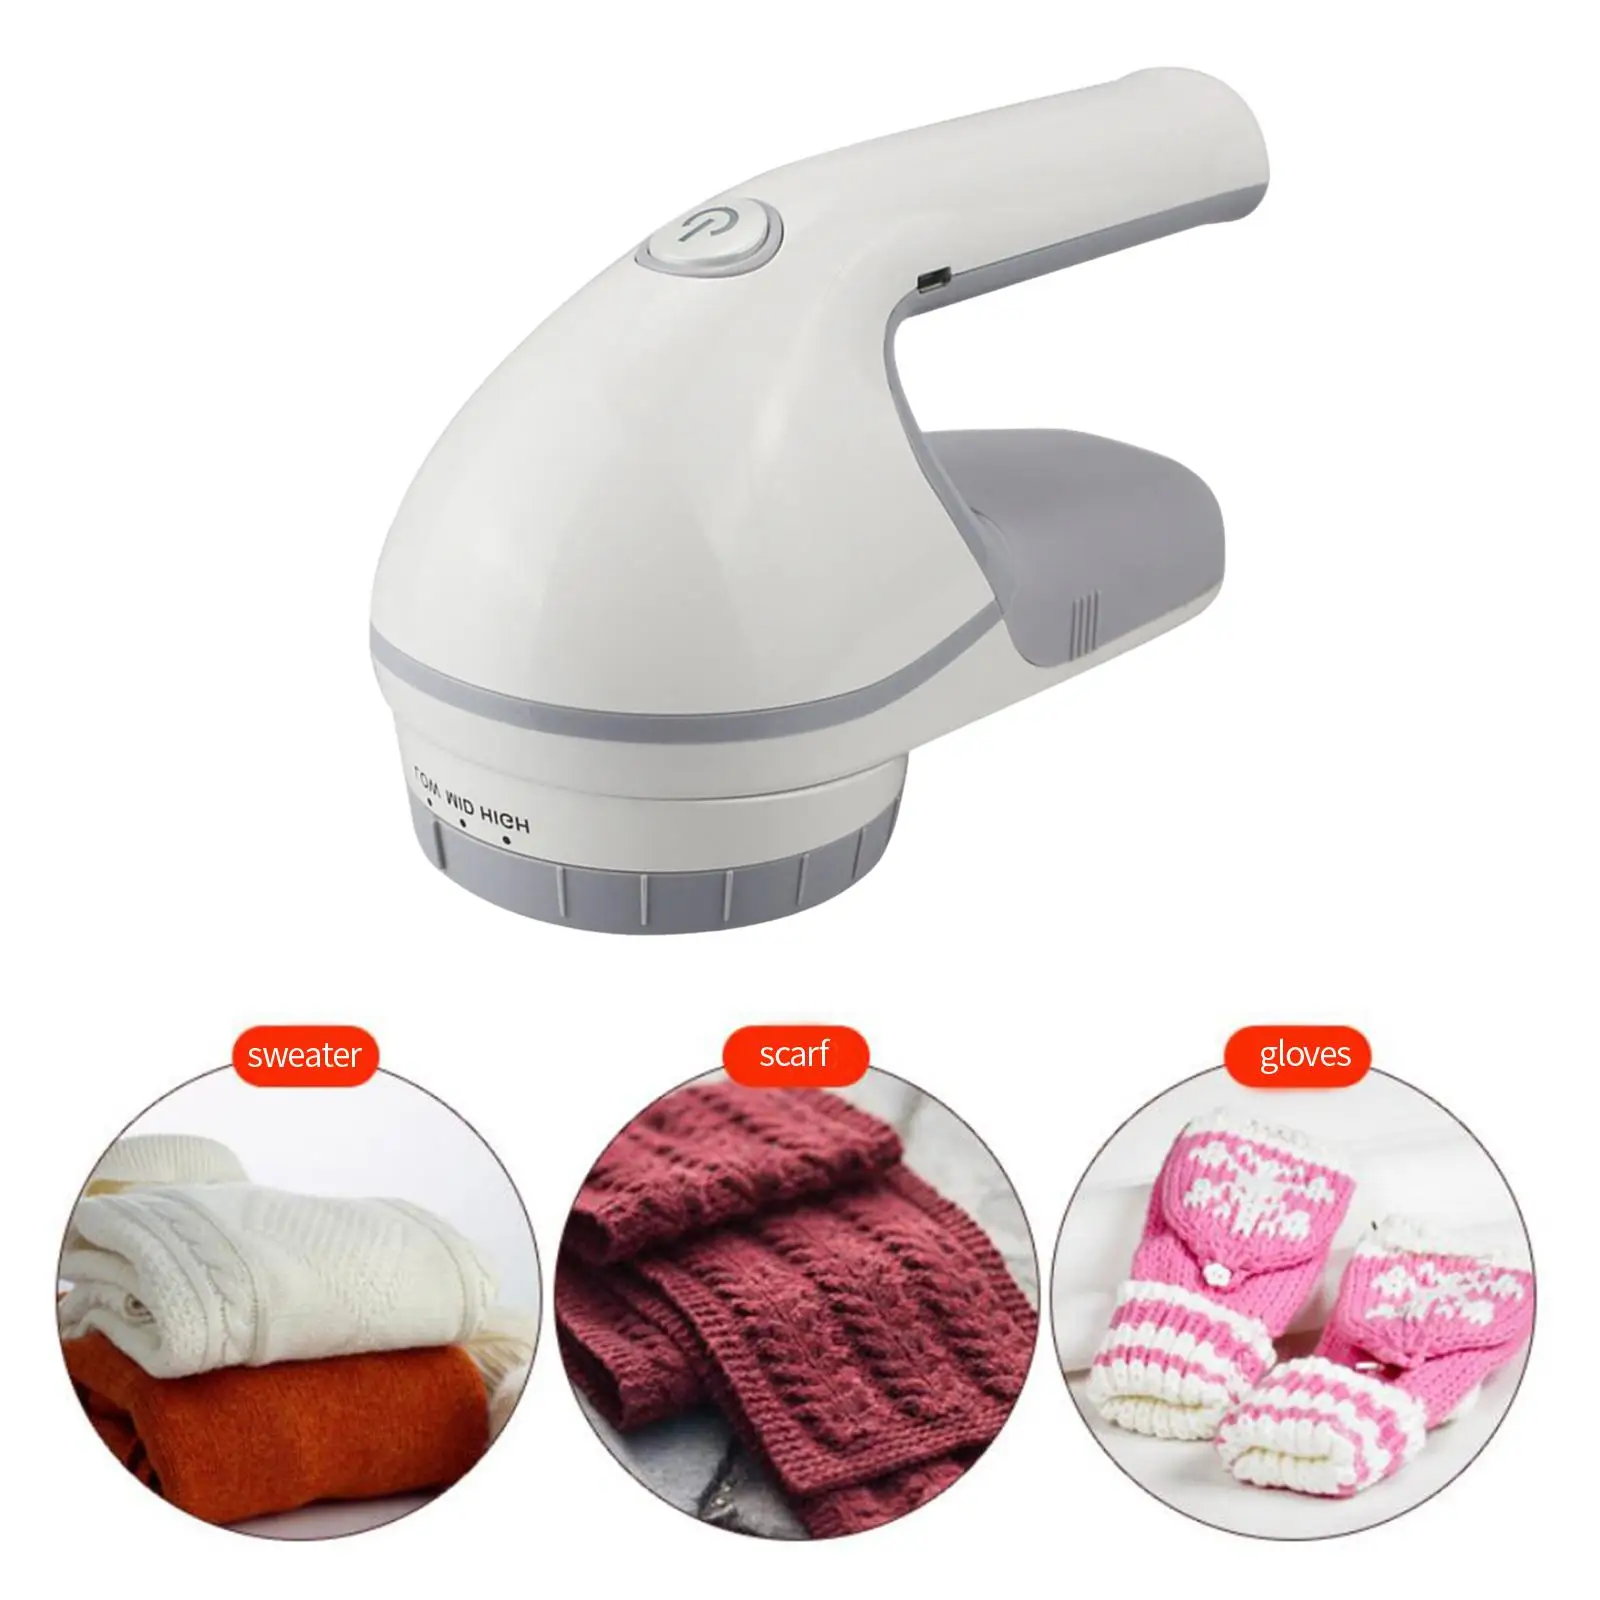 USB Lint Remover Sweater Fabric Shaver Removal 6-Leaf Blade Rechargeable for Cotton Clothing Fibers Flannel Blanket